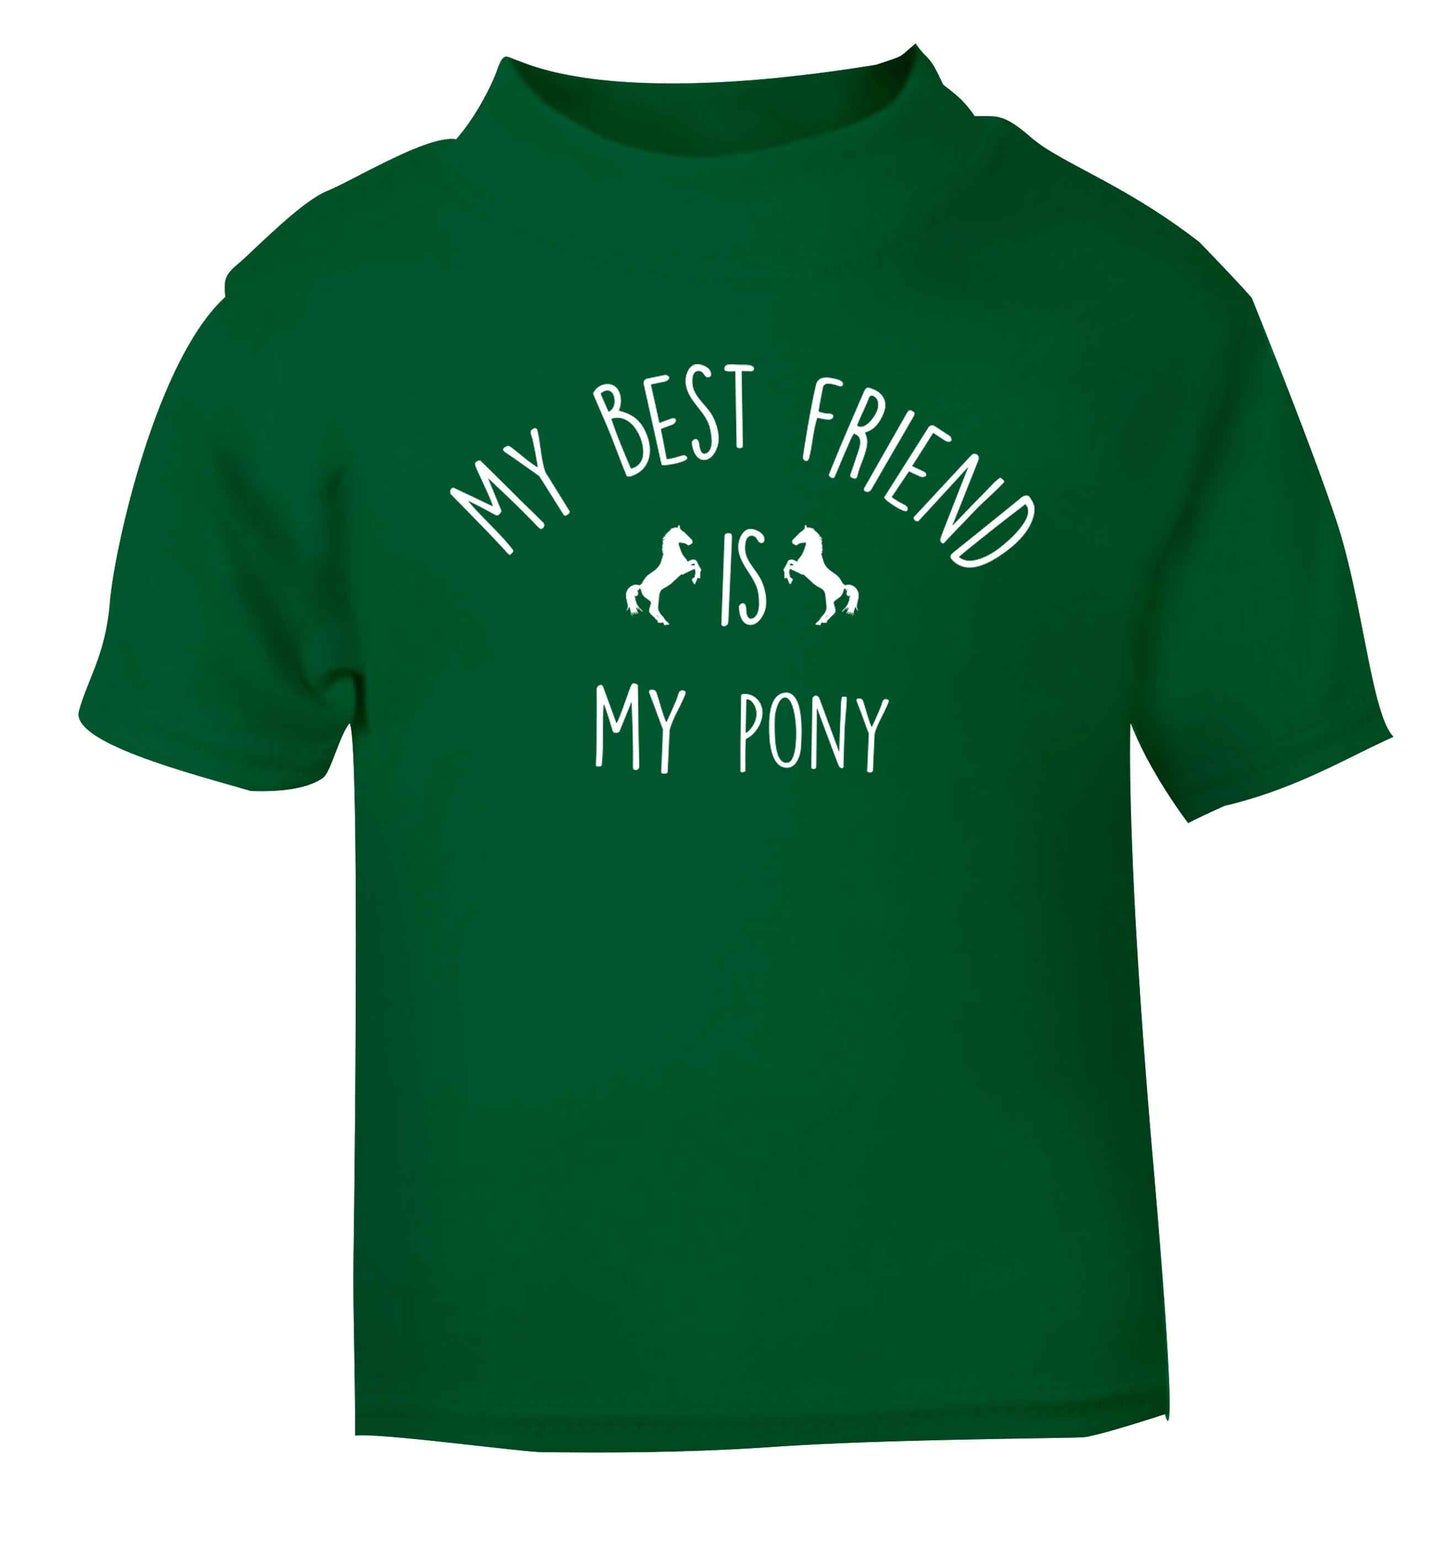 My best friend is my pony green baby toddler Tshirt 2 Years